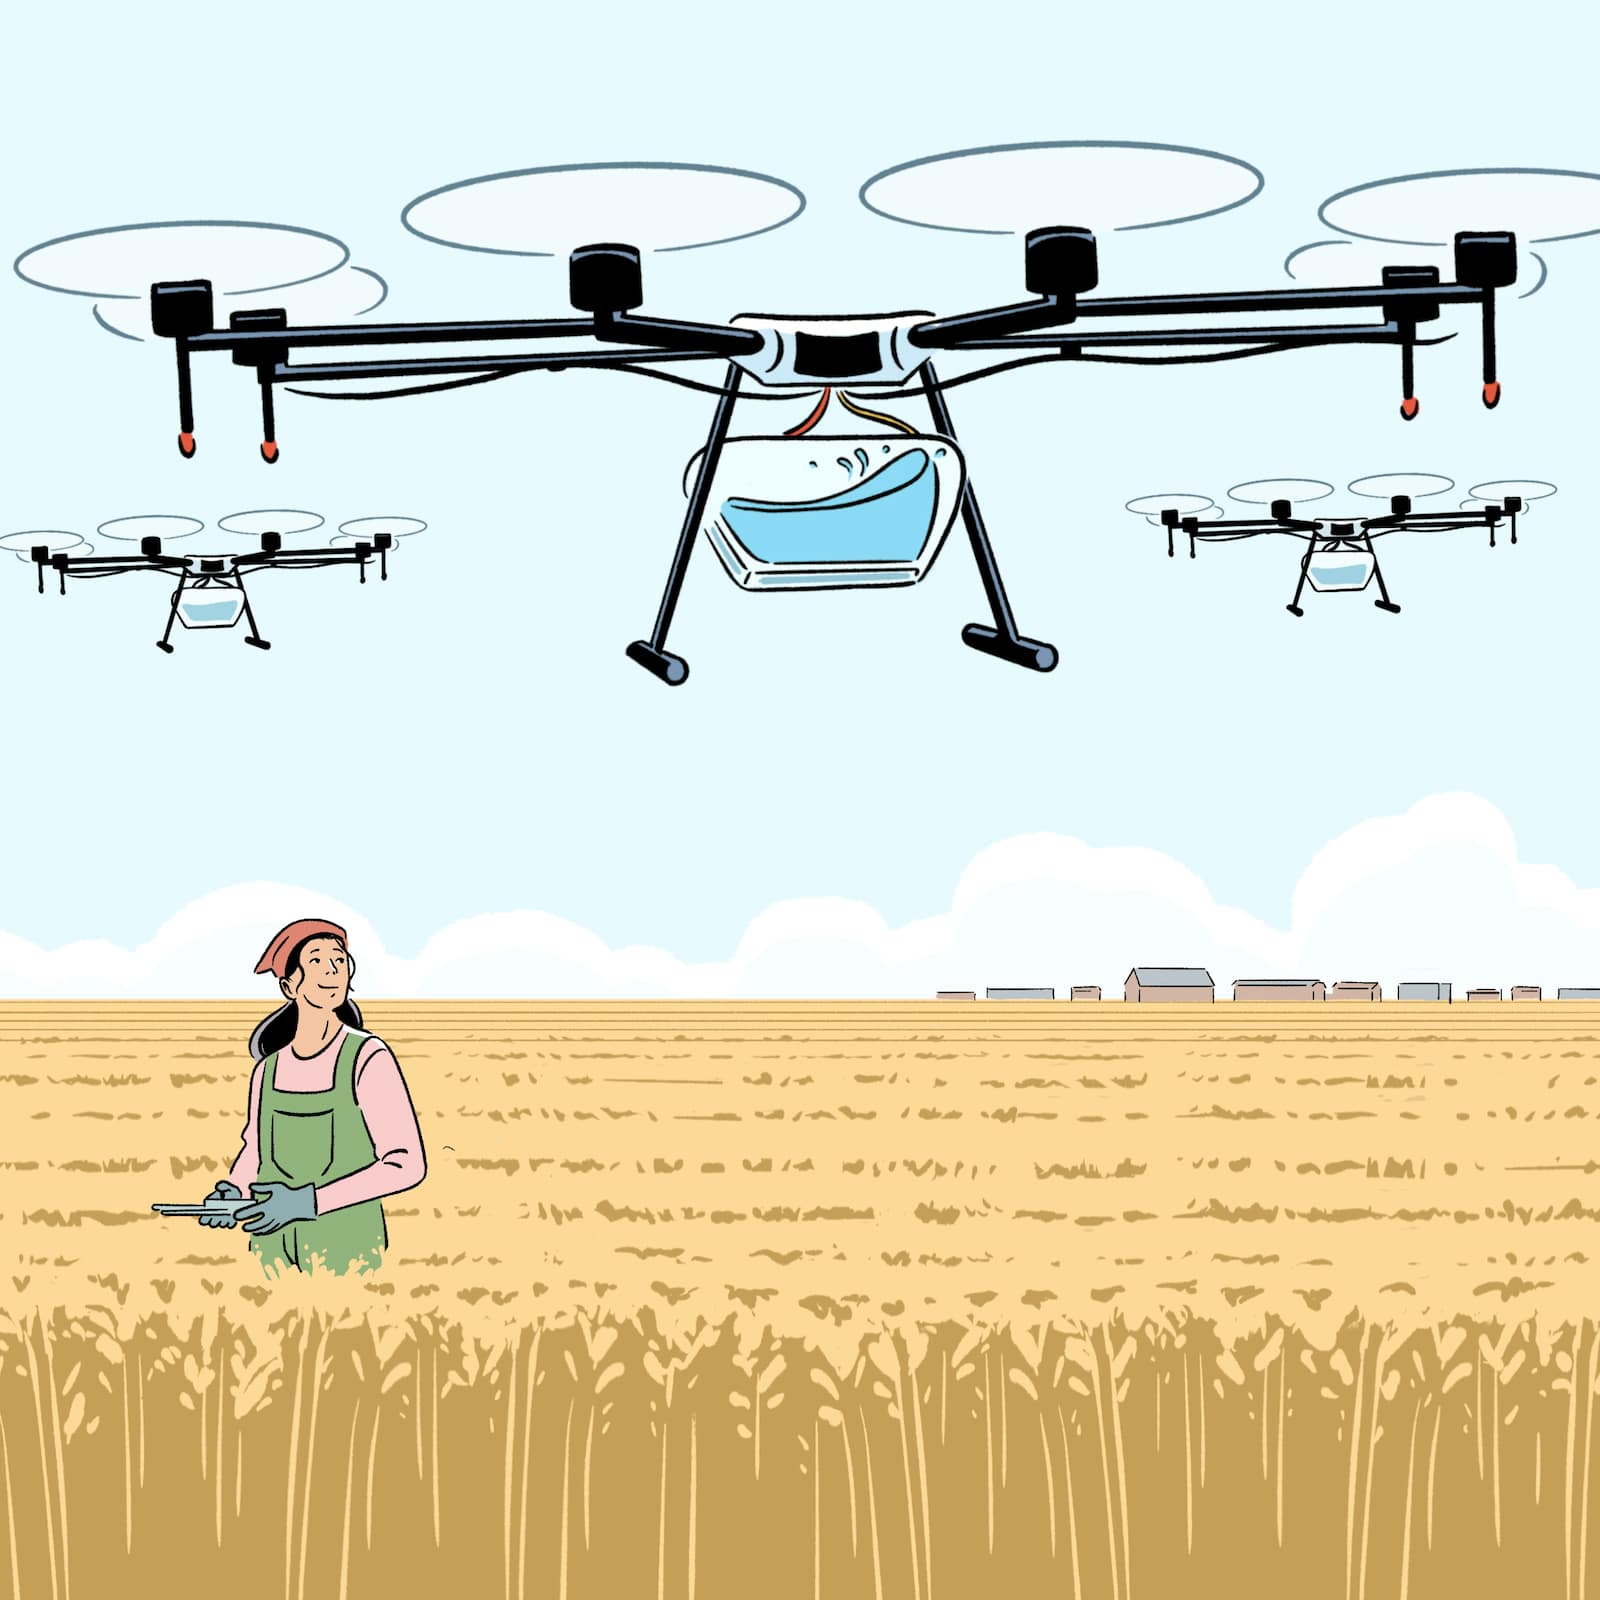 Illustration of a farmer standing in a field and operating drones